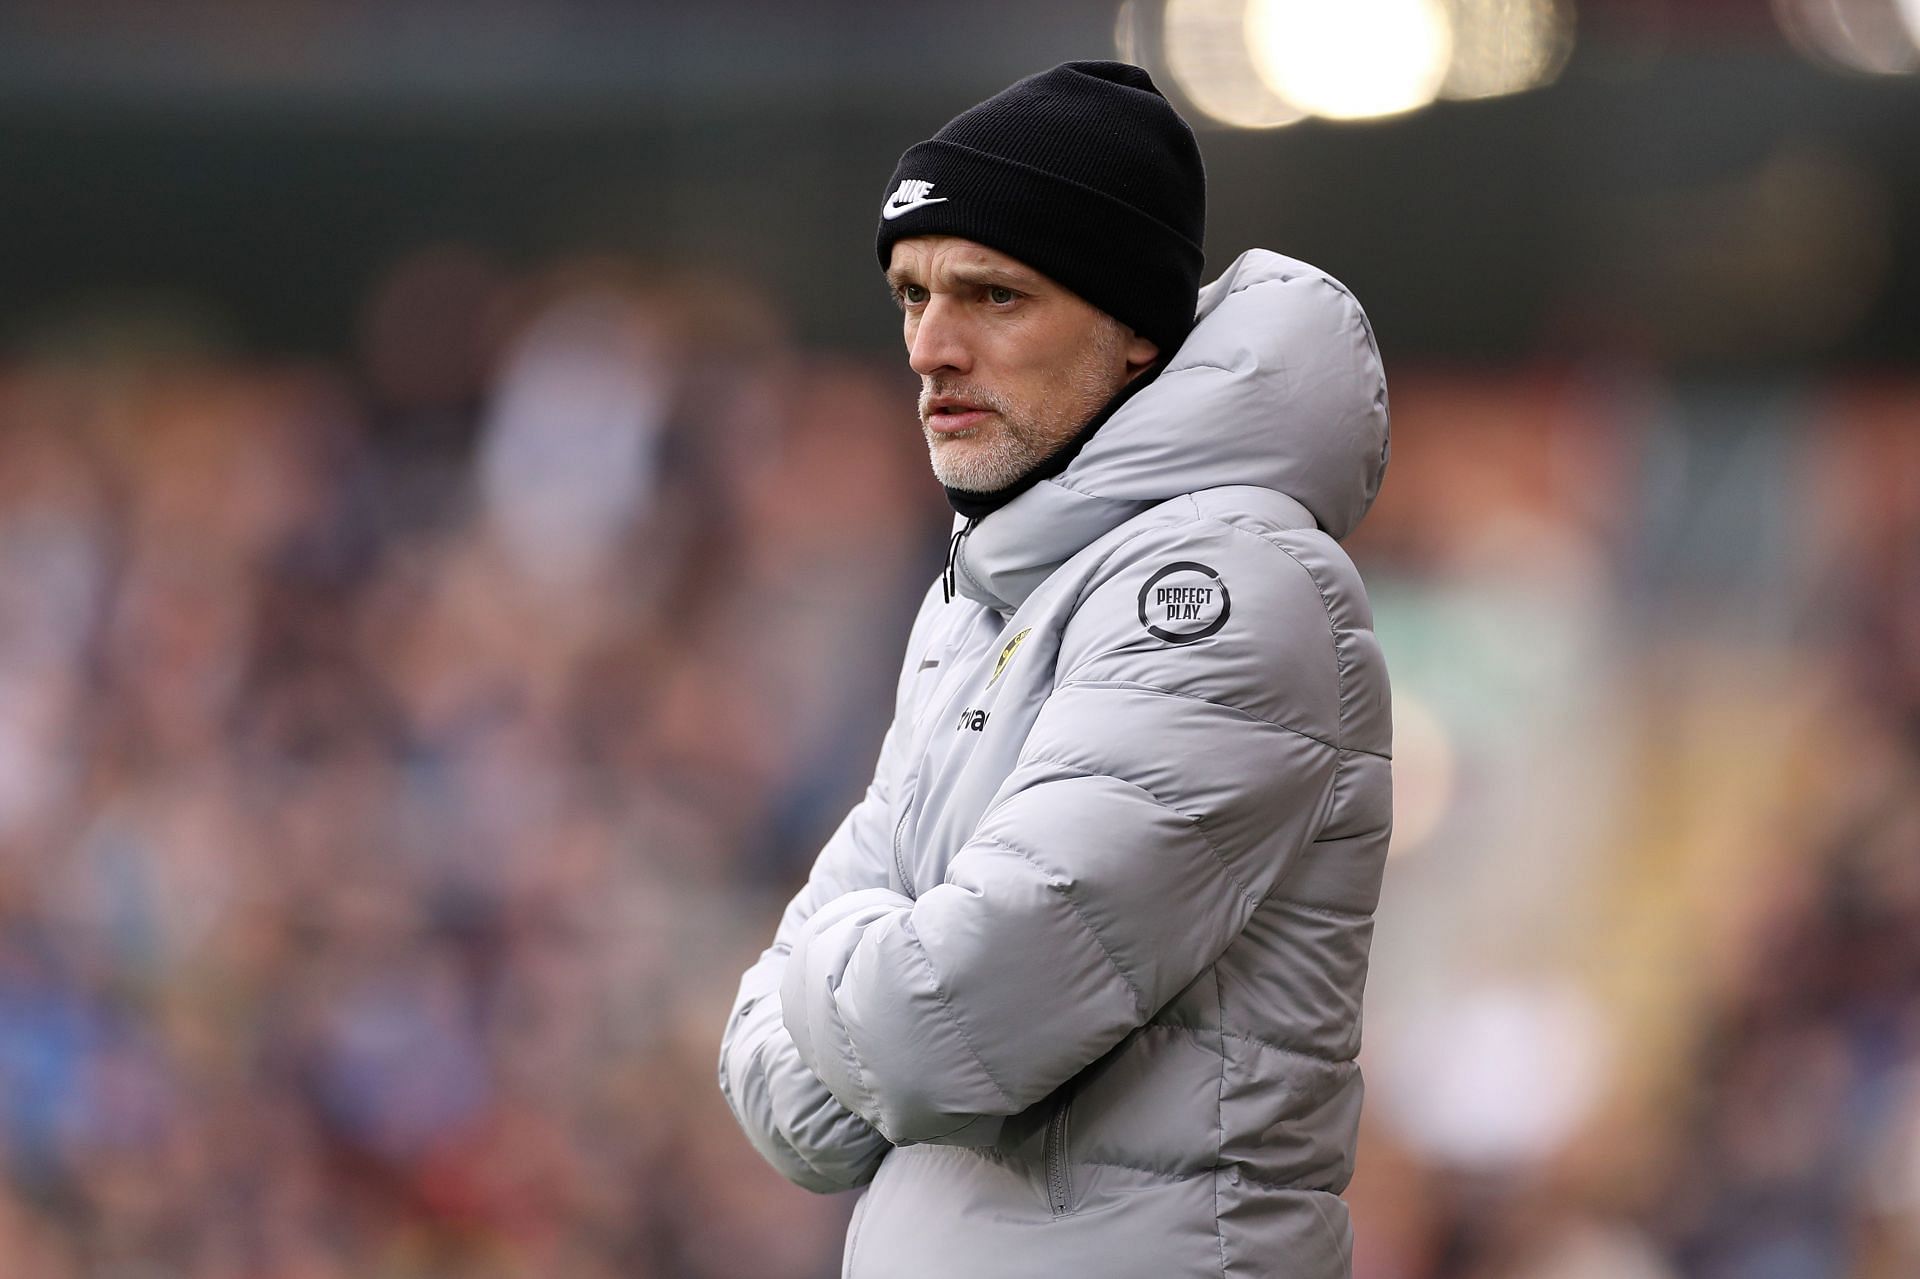 Chelsea manager Thomas Tuchel suffered a setback in the title race.